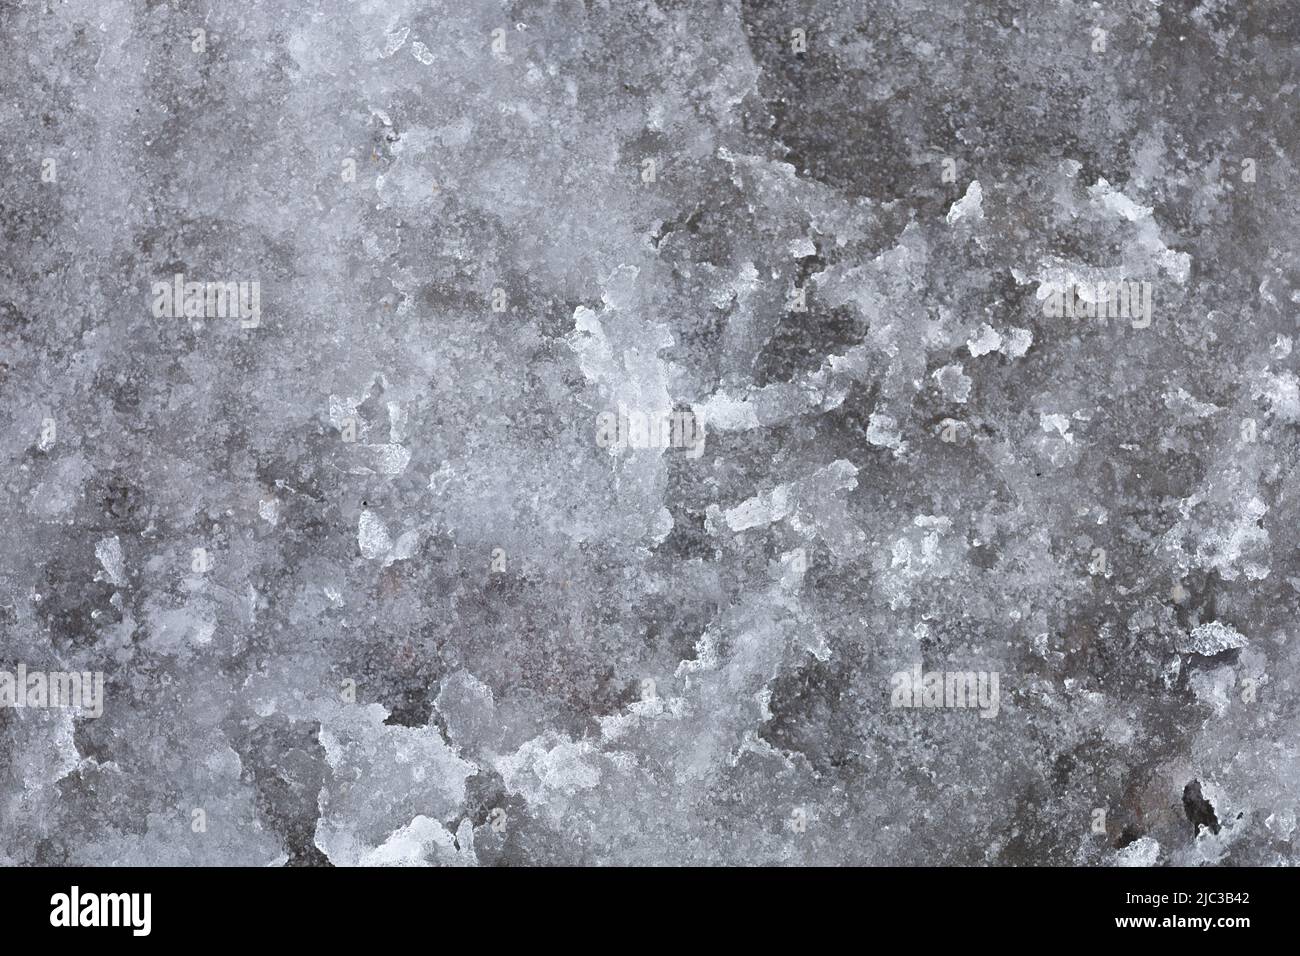 Abstract background with snow slush outside on street road caused by melting snow. Muddy snowy road. Winter is over and spring time comes when Stock Photo